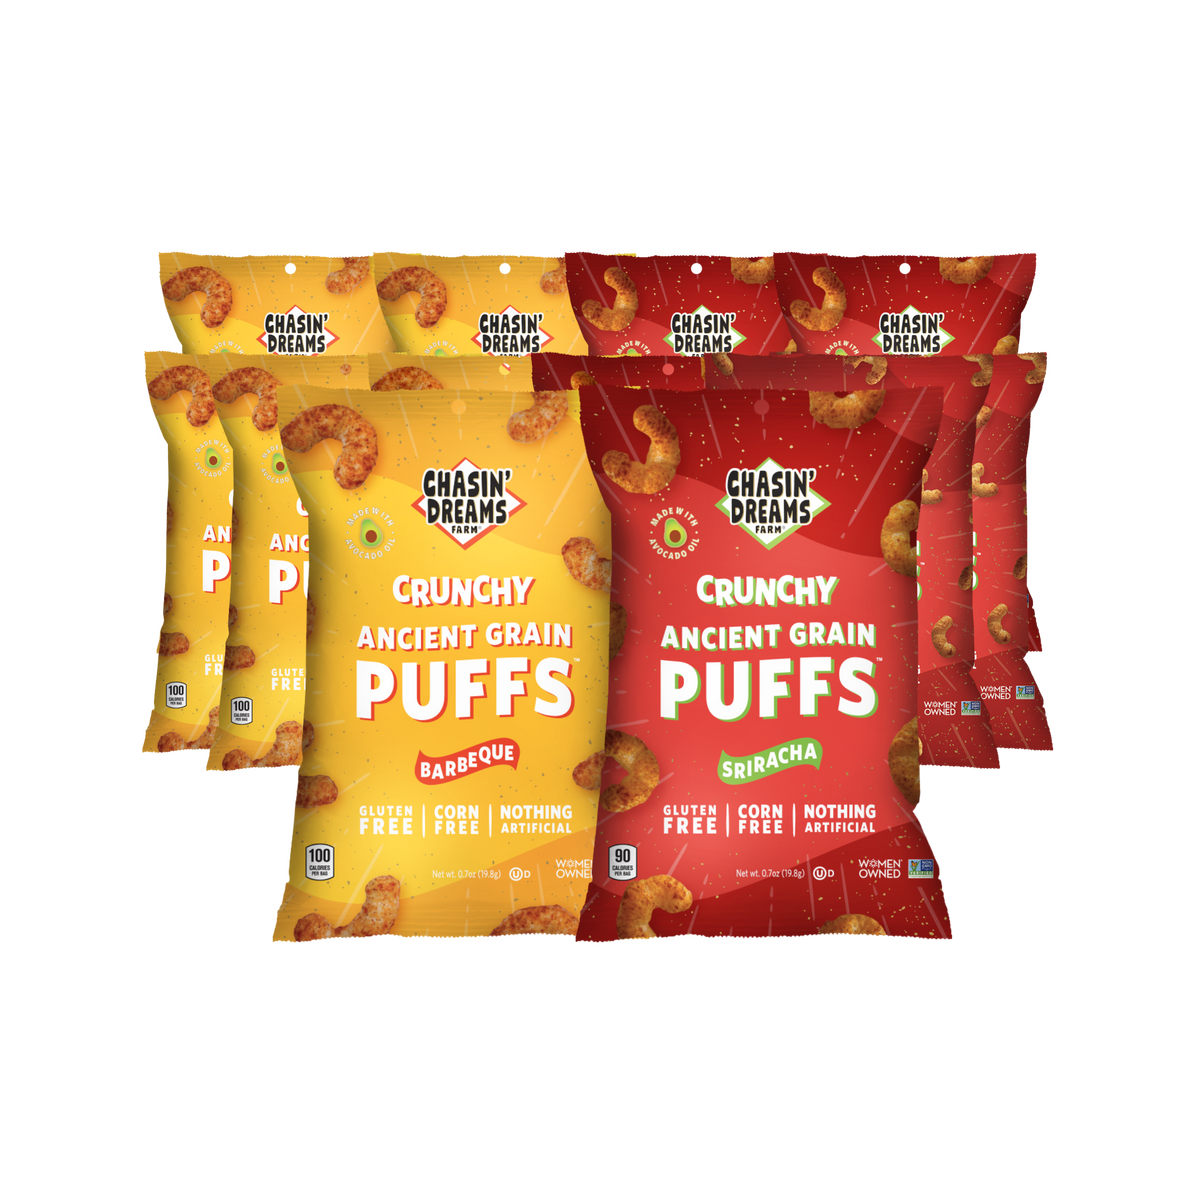 Six yellow bags of Crunchy Ancient Grain Barbeque Puffs 0.7oz and six red bags of Sriracha Puffs 0.7oz.